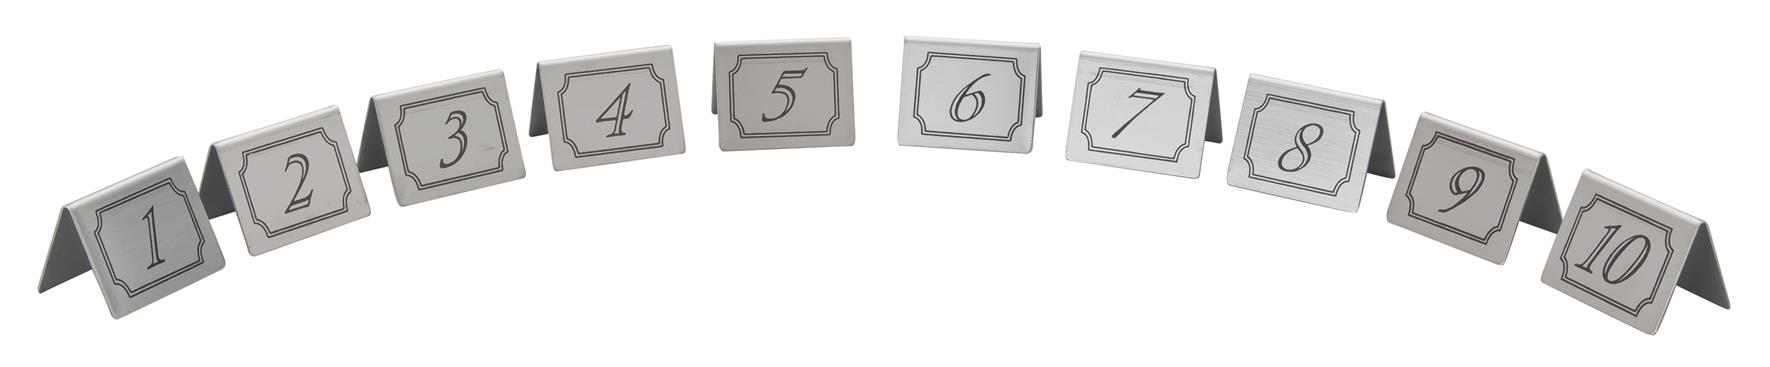 1-10 Stainless Steel Table Numbers (Each) 1-10, Stainless, Steel, Table, Numbers, Beaumont